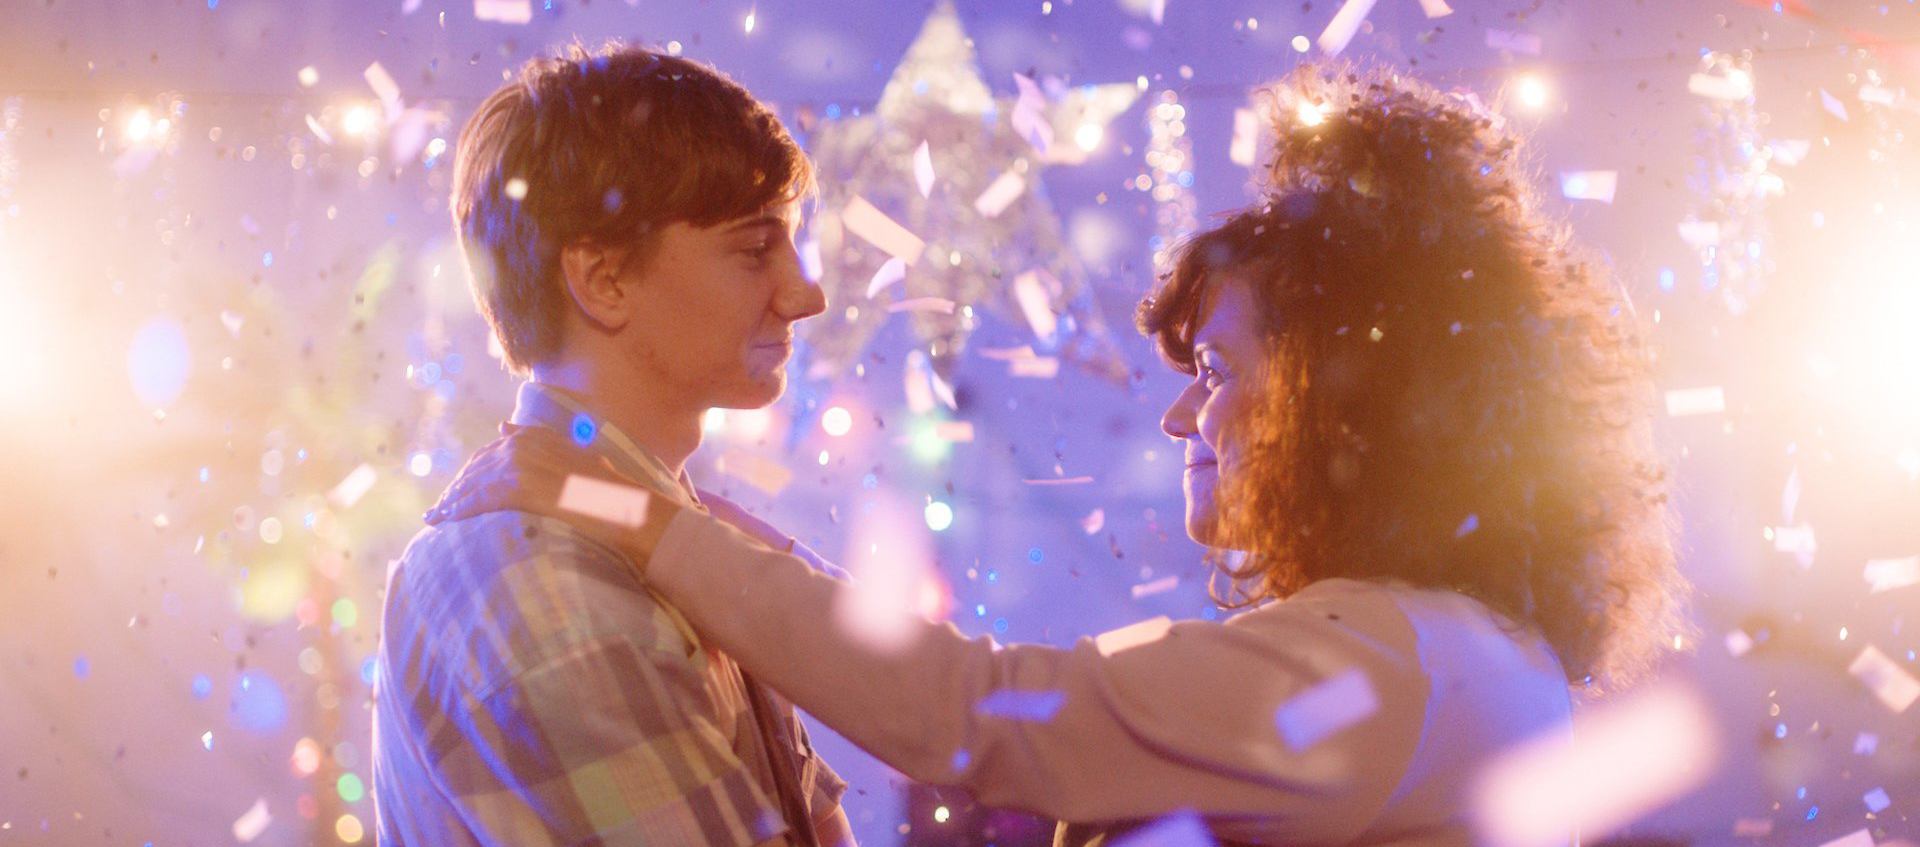 Cecilia Aldorando has her hands on the shoulders of her first boyfriend as they dance together surrounded by confetti. 